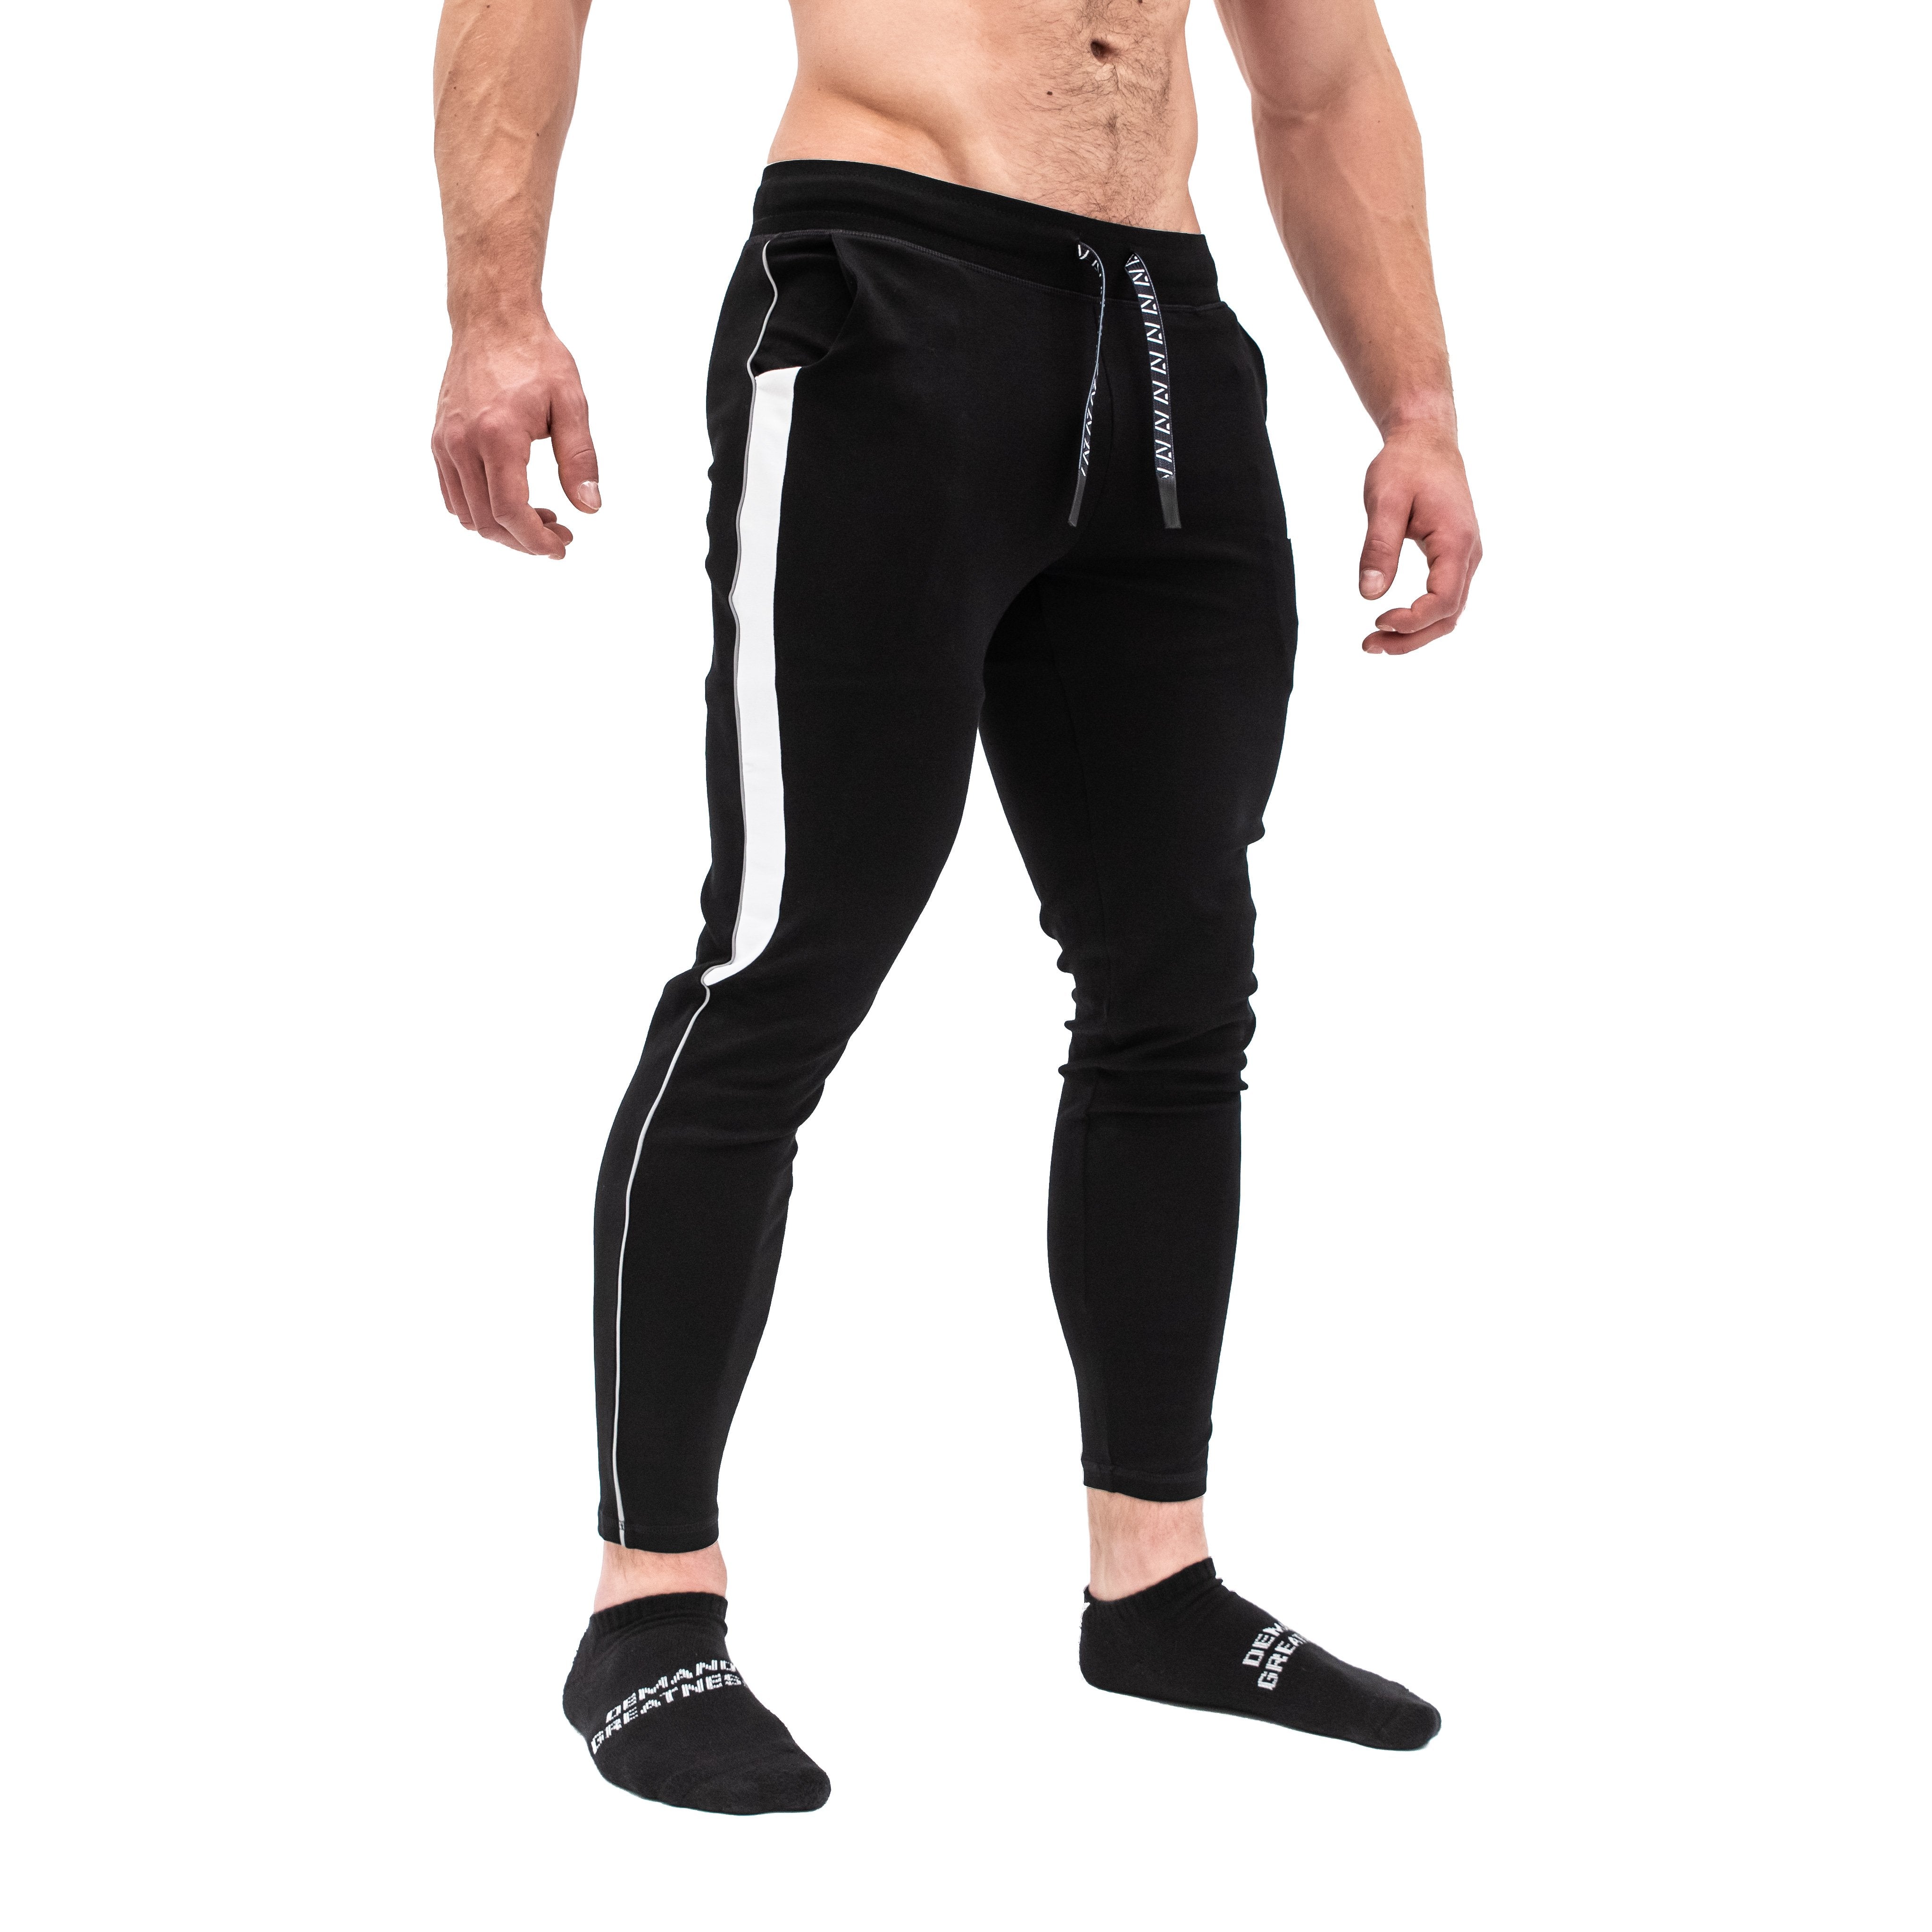 When we set out to create our Moxie Joggers we knew they had to meet the high standard we established with our Defy Joggers.We wanted to introduce some new elements that we felt could bring joy in both your comfort and style!